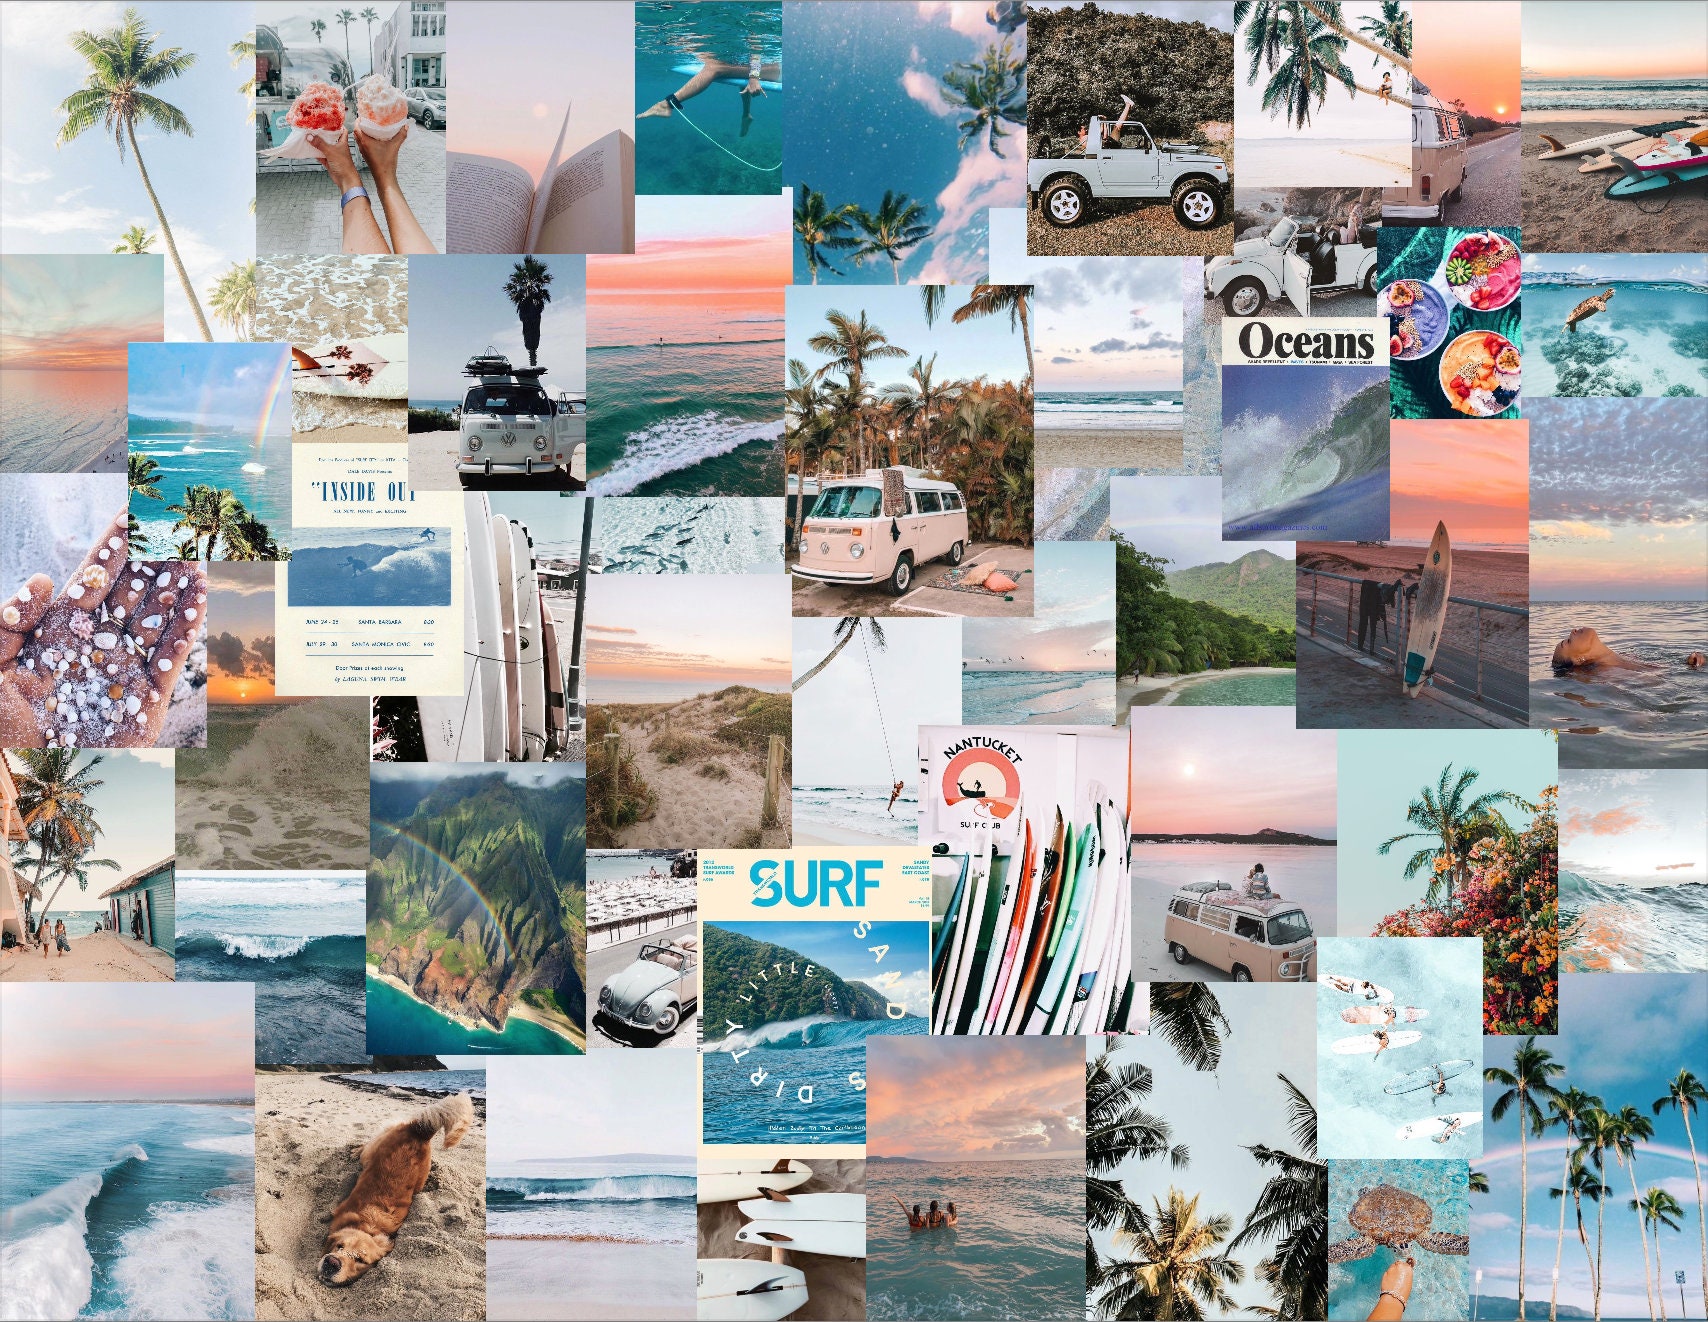 A collage of surfing photos and beach scenes. - Surf